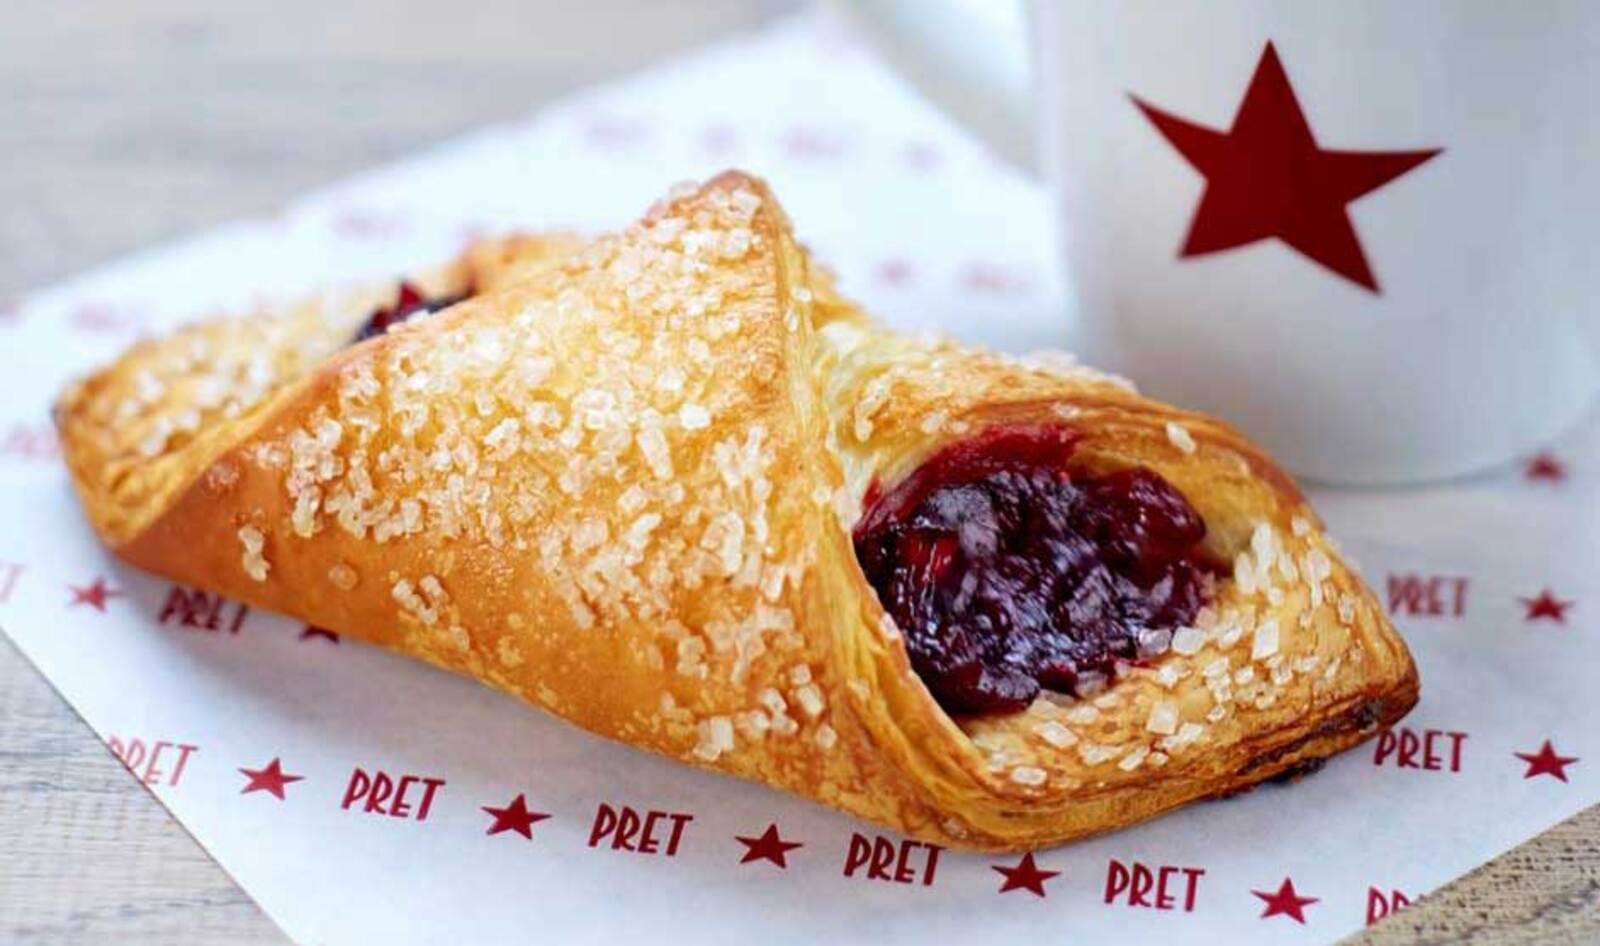 Pret a Manger Launches its First Vegan Croissant in UK